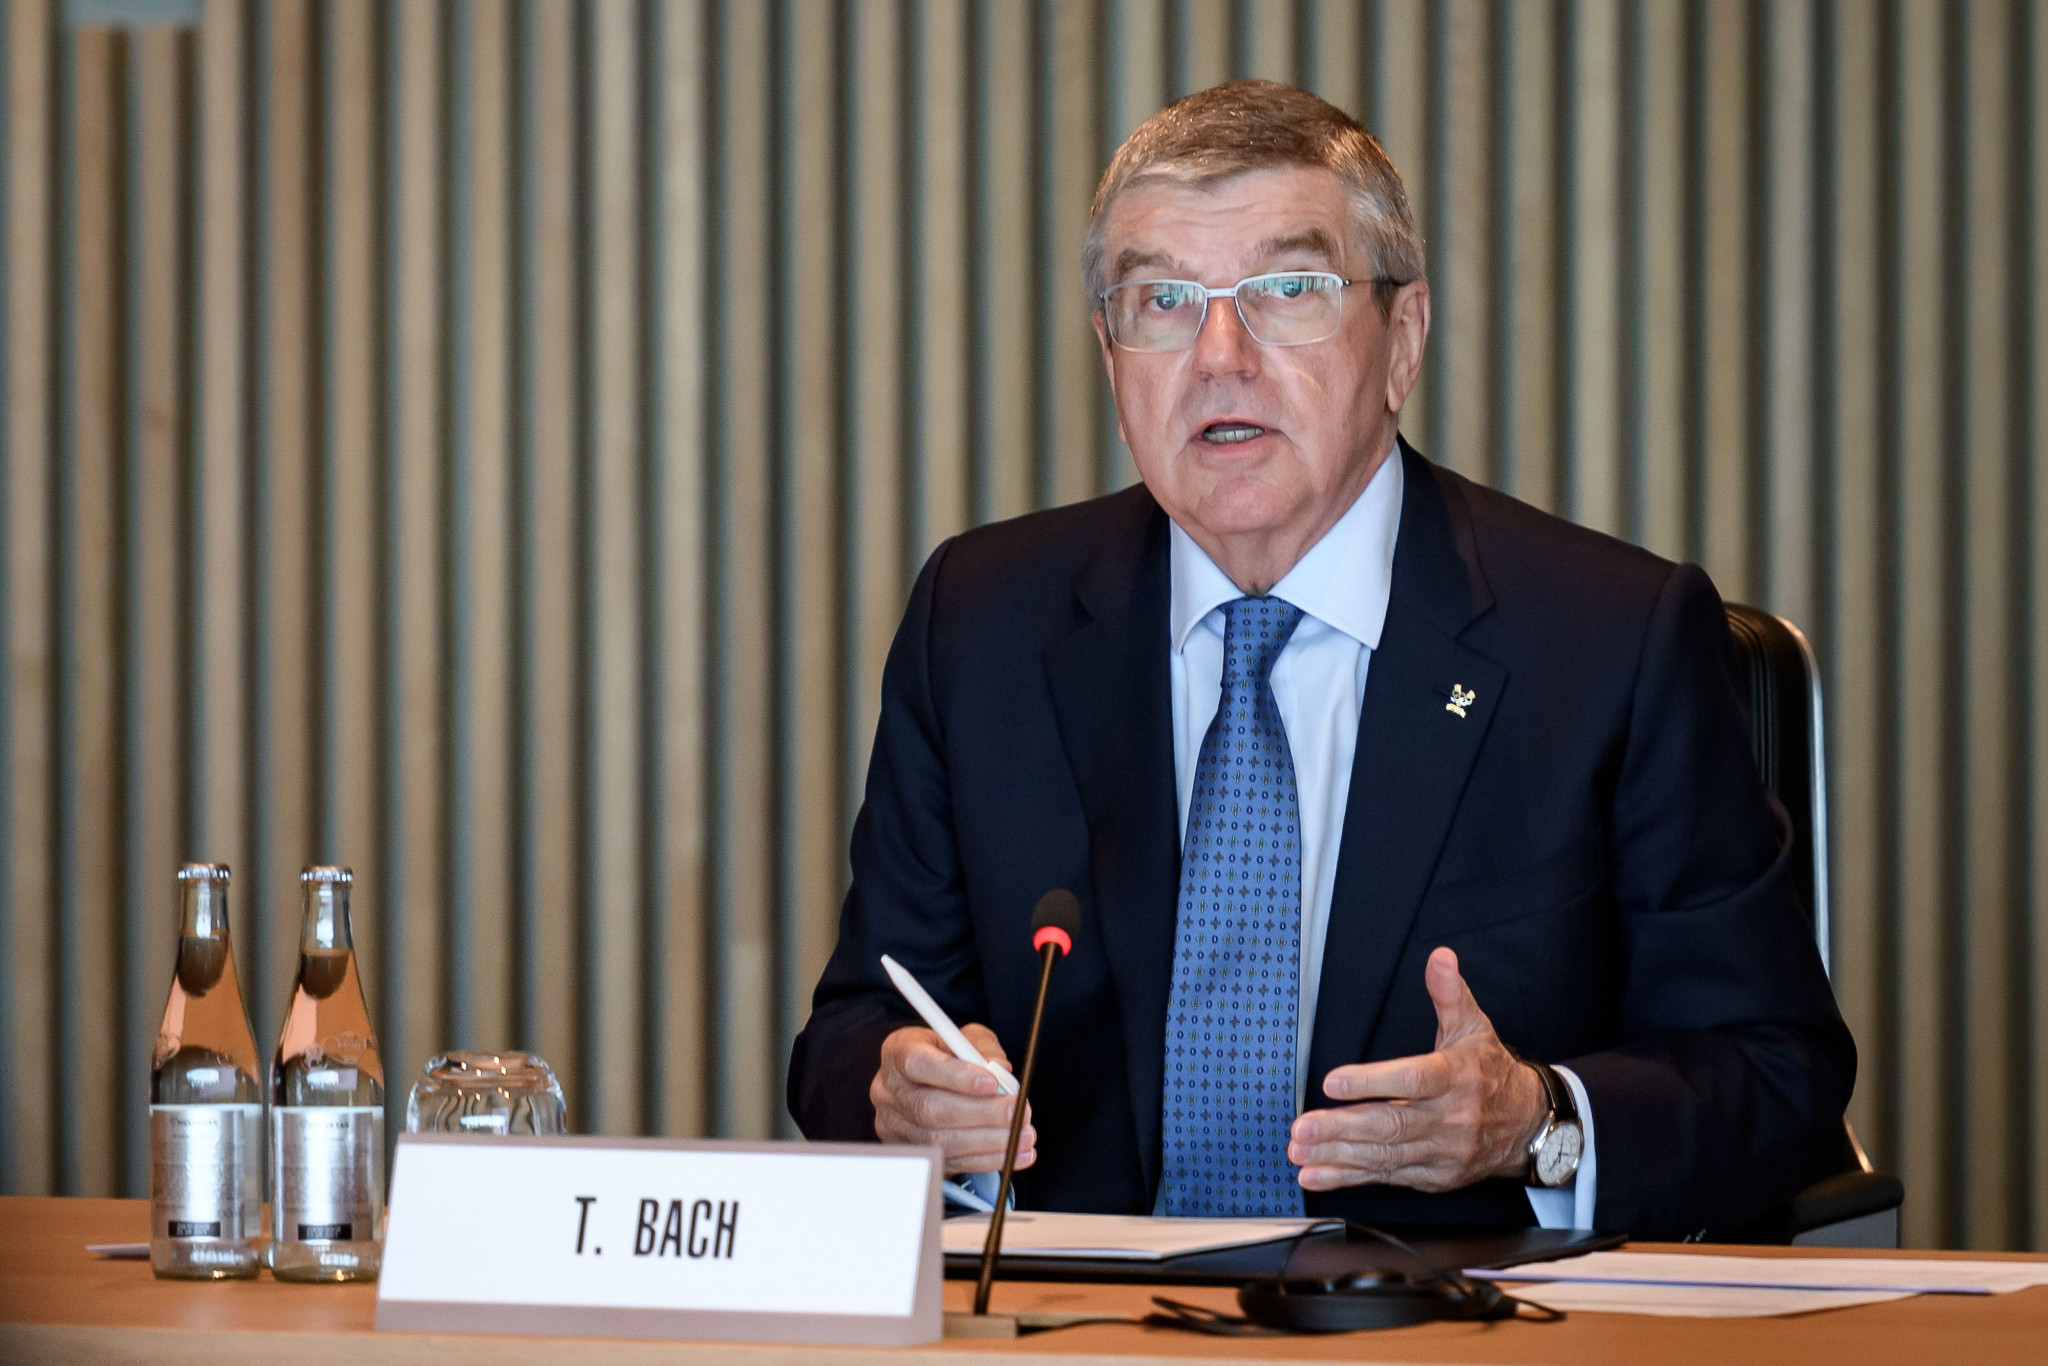 IOC President Thomas Bach has repeatedly voiced concern about the way weightlifting is governed ©Getty Images